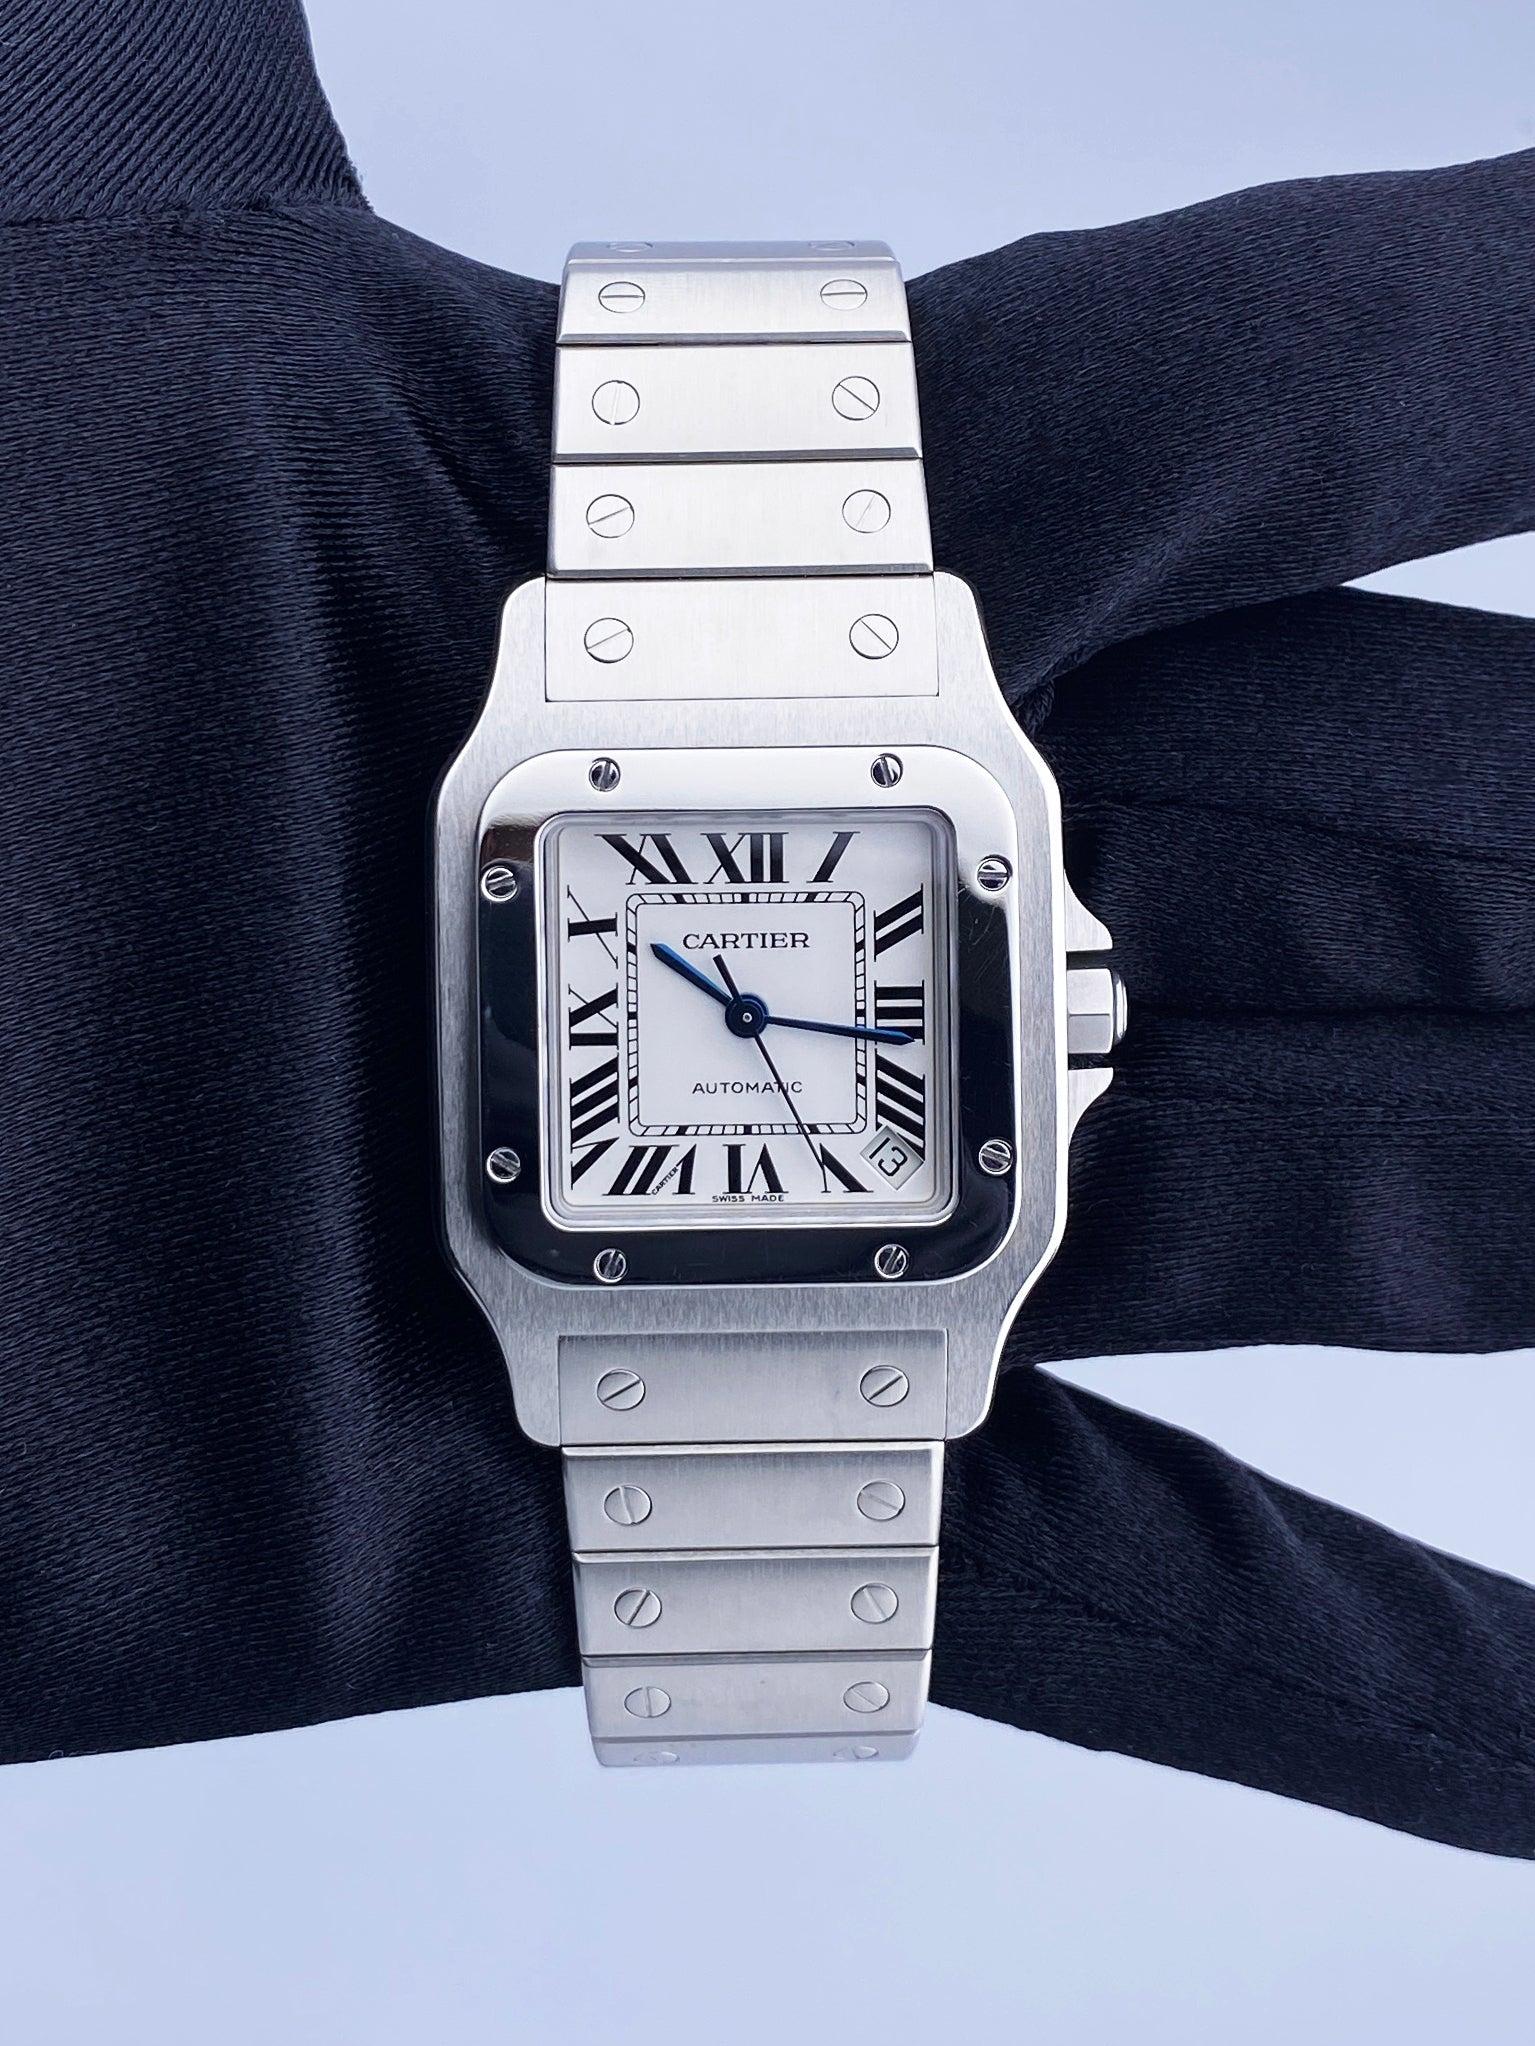 Cartier Santos 2823 Mens Watch. 32mm stainless steel case with stainless steel fixed bezel. Silver dial with blue steel hands Black Roman numeral hour markers. Minute markers around an inner dial. Date display between 4 and 5 o'clock position.